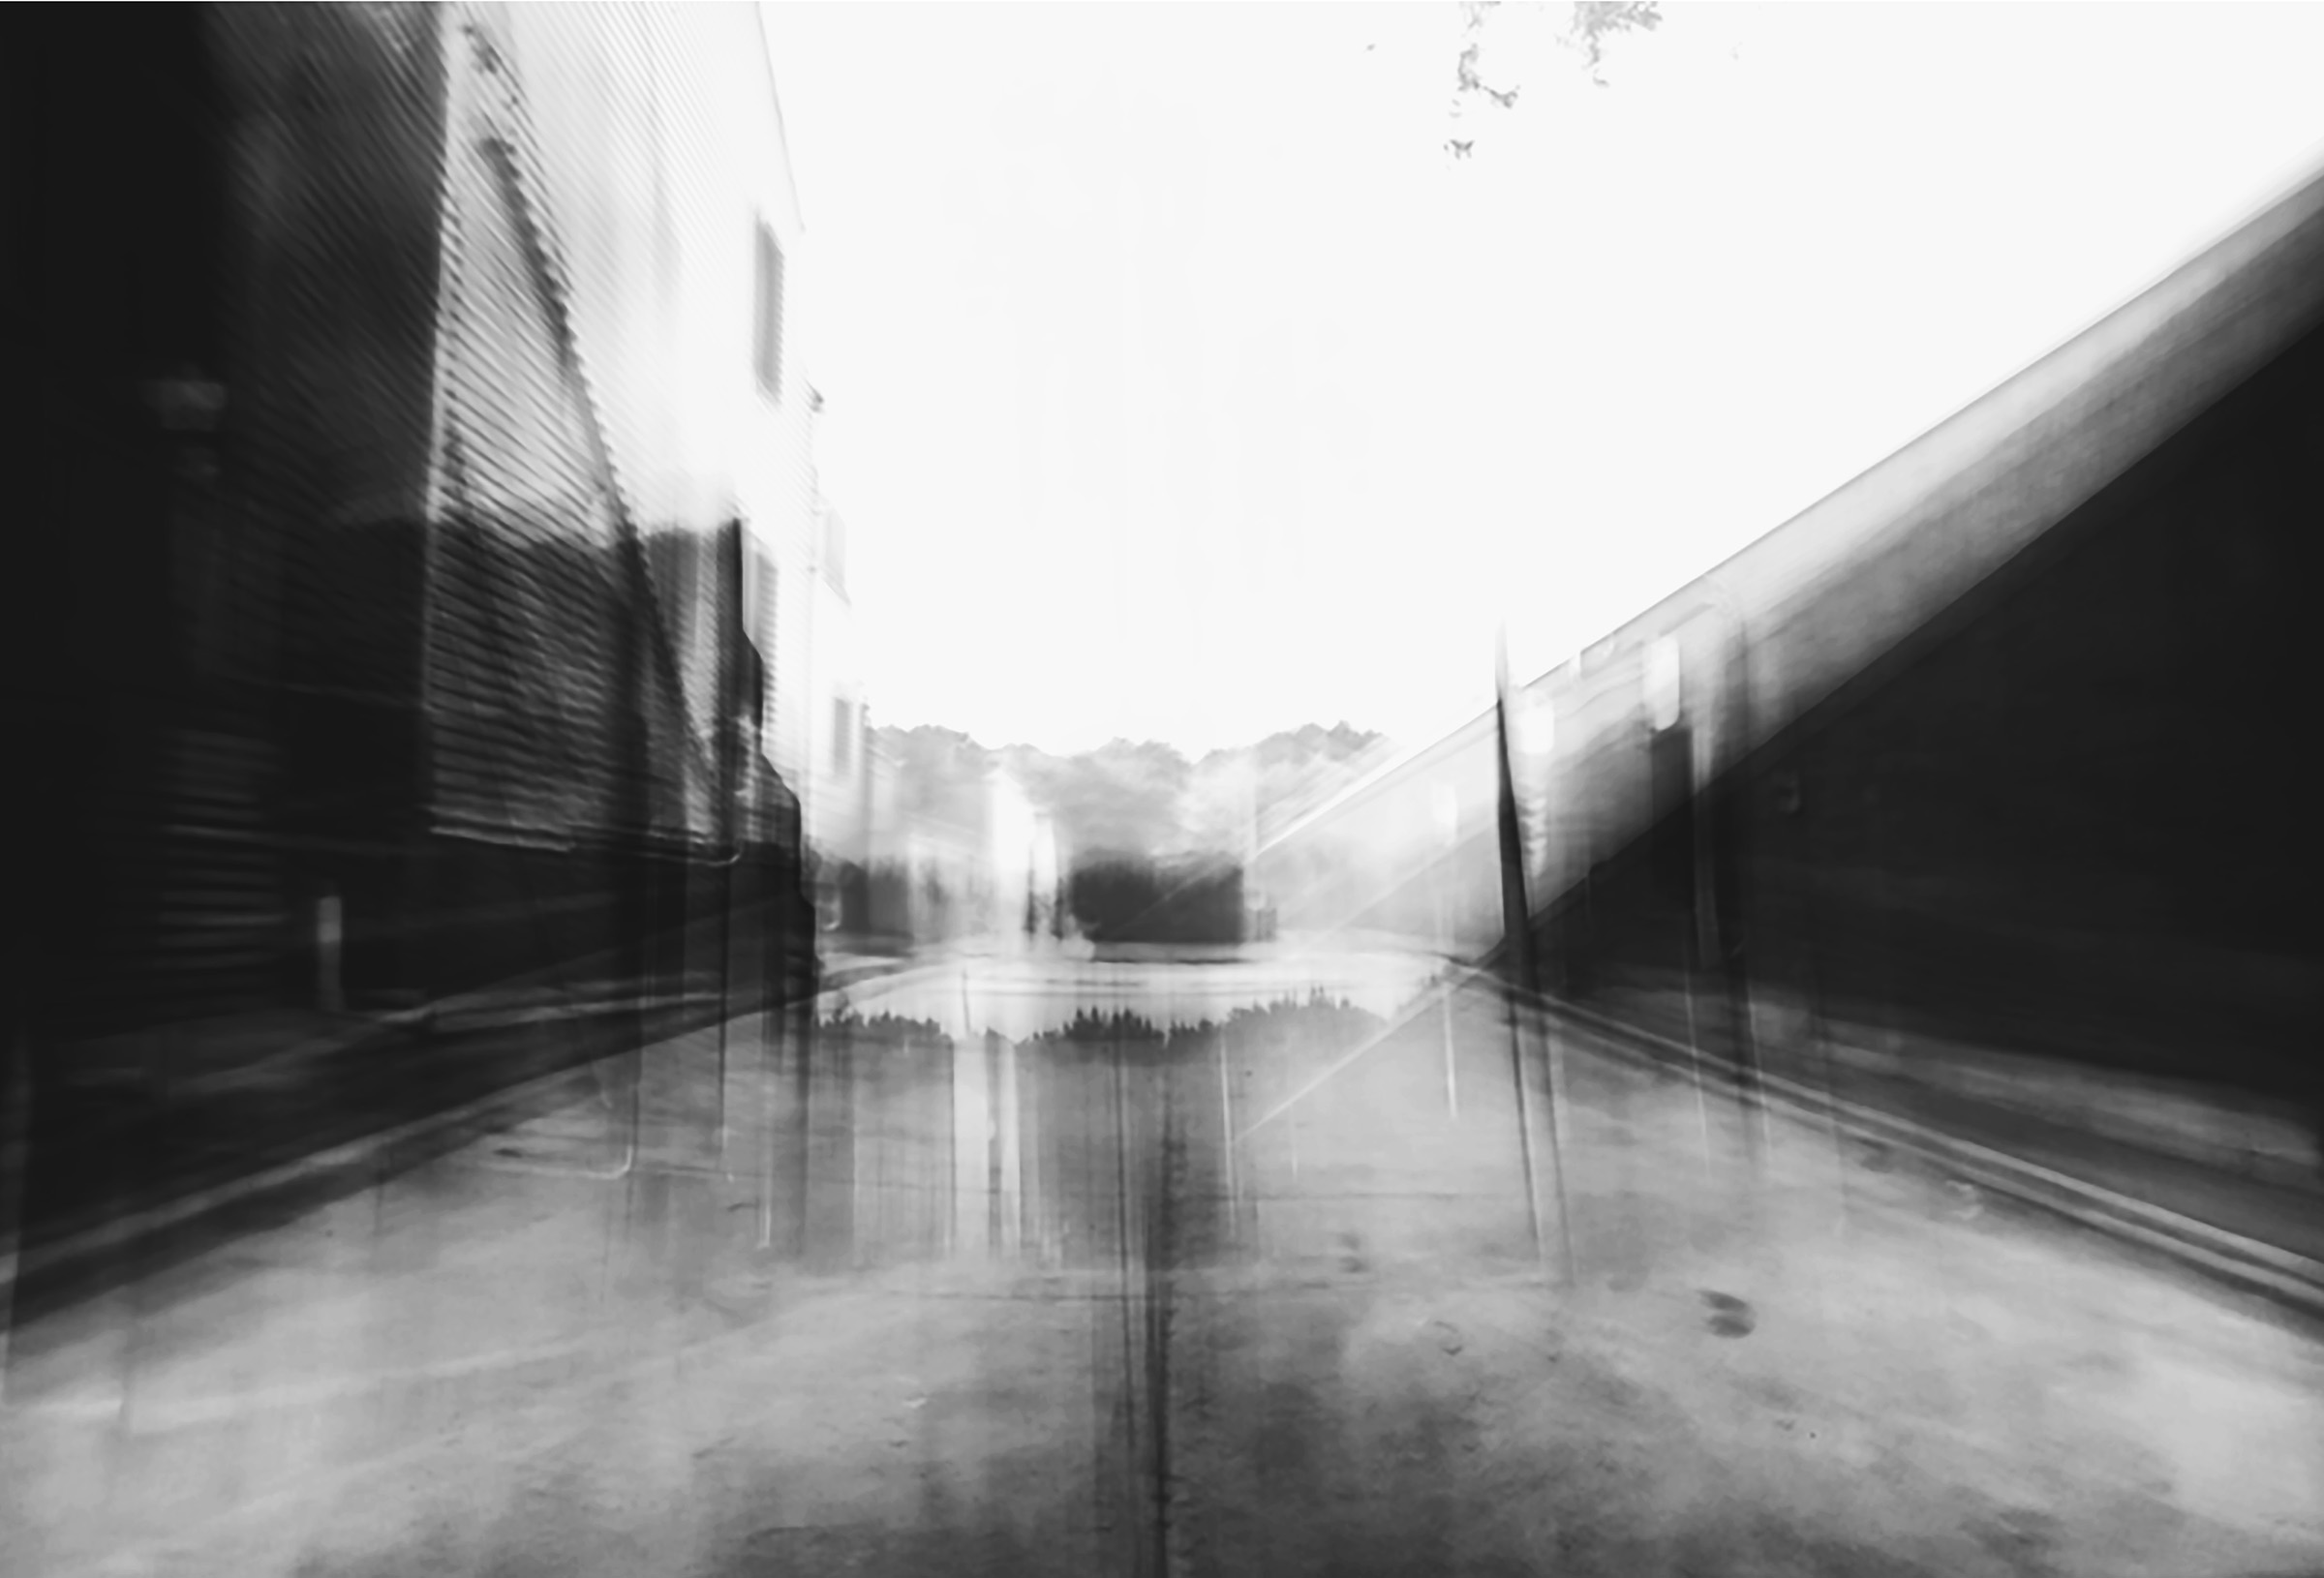 A black and white long exposure photo of an alley. There are sides of houses on the left of the alley and the back of a store on the right side of the alley. Behind the alley are trees.